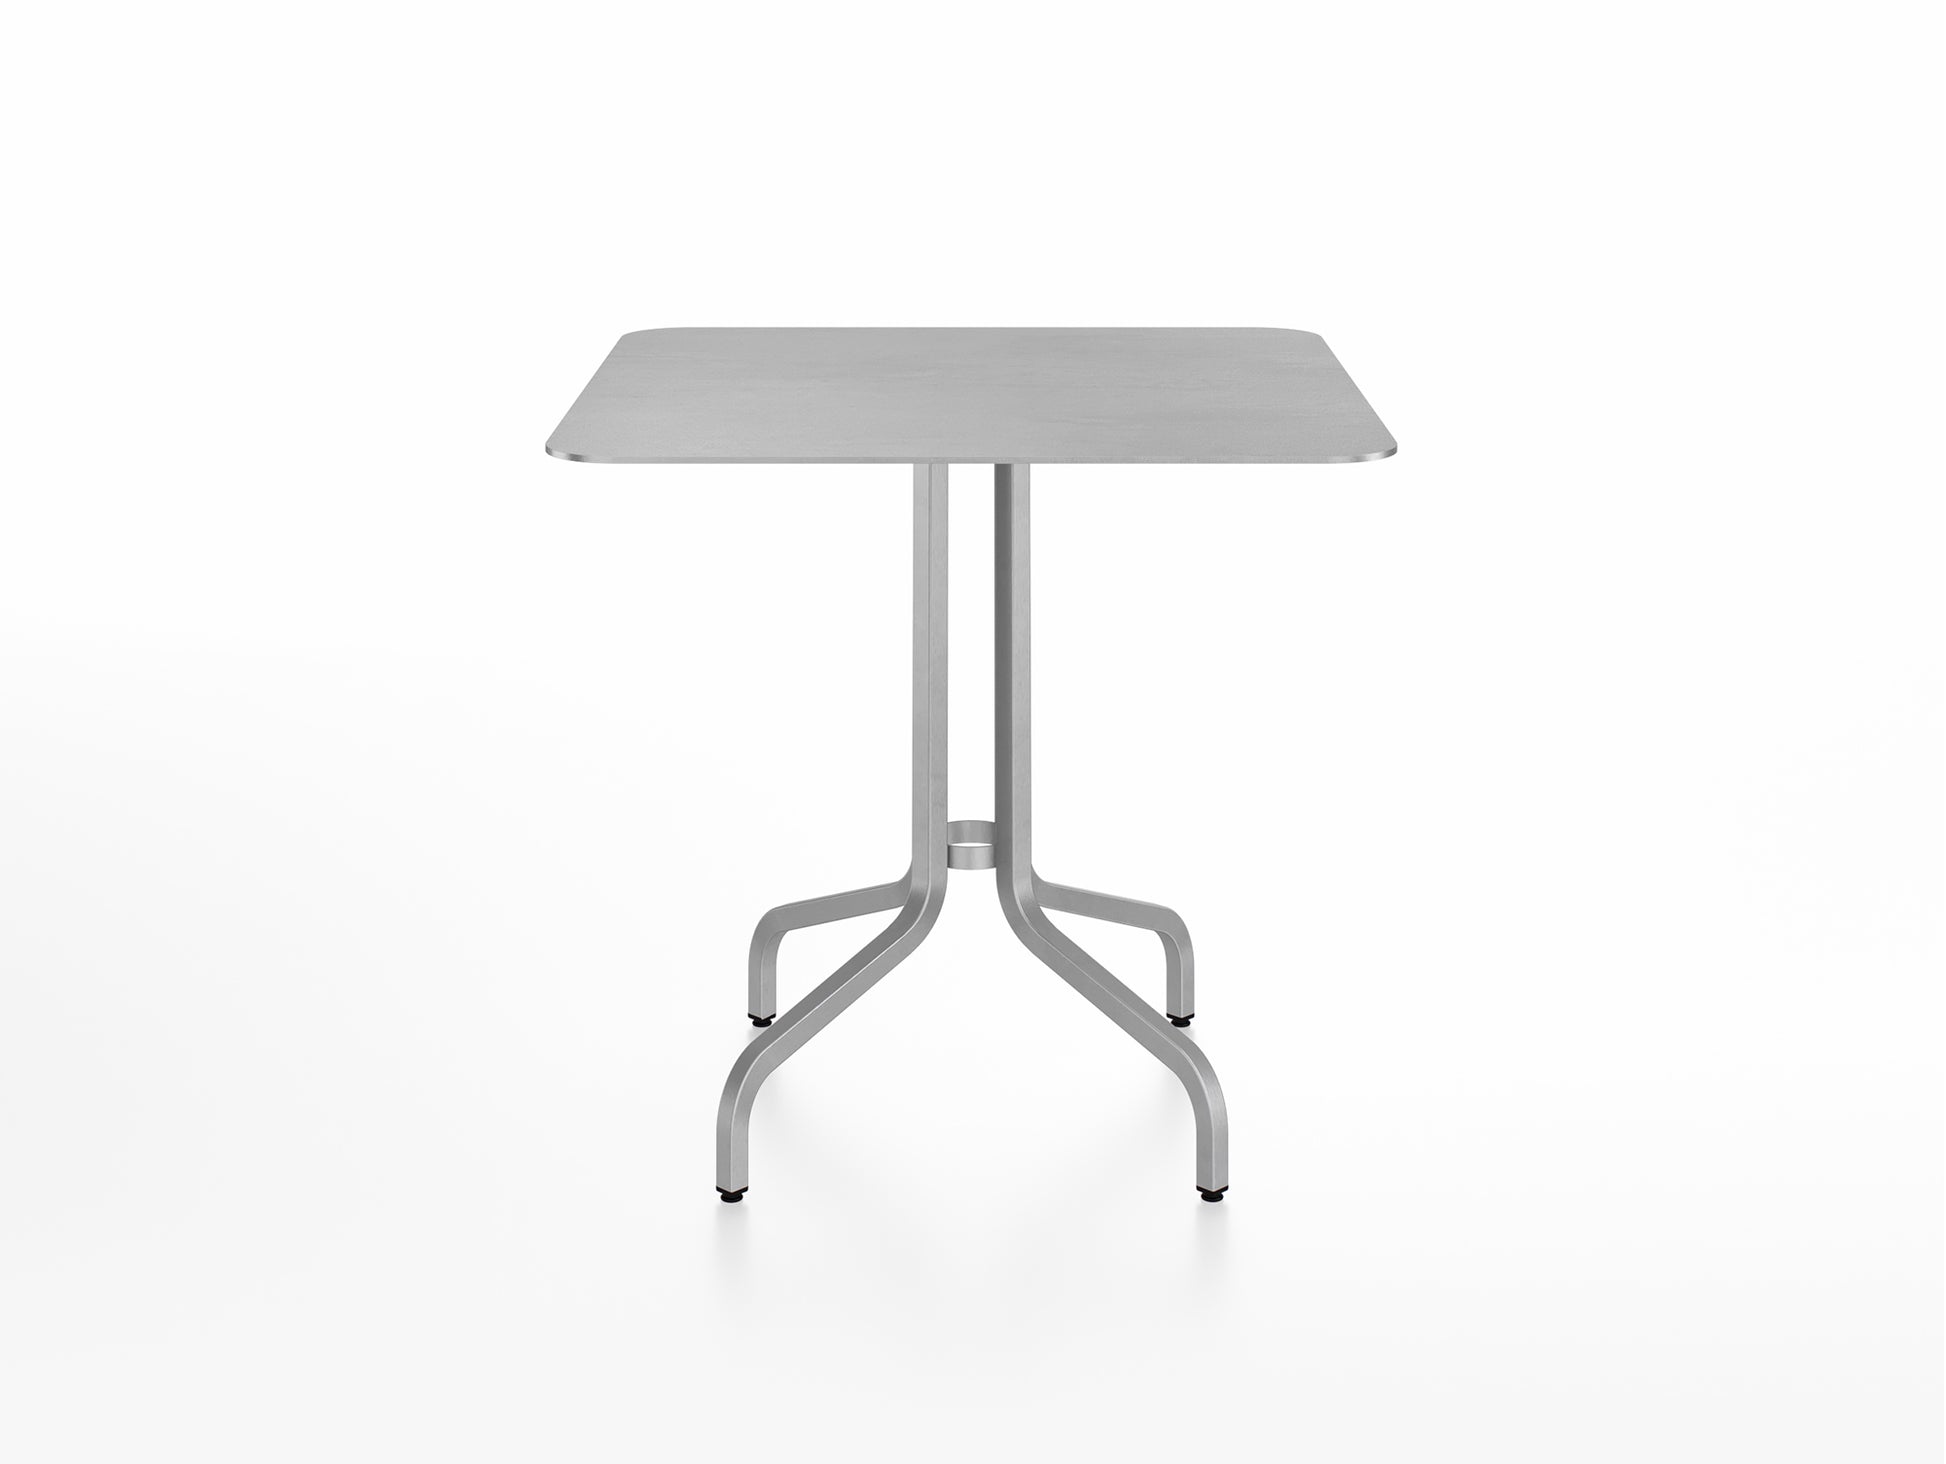 1 Inch Outdoor Cafe Table by Emeco - Square (76 x 76 cm) / Hand Brushed Aluminium Base / Aluminium Tabletop